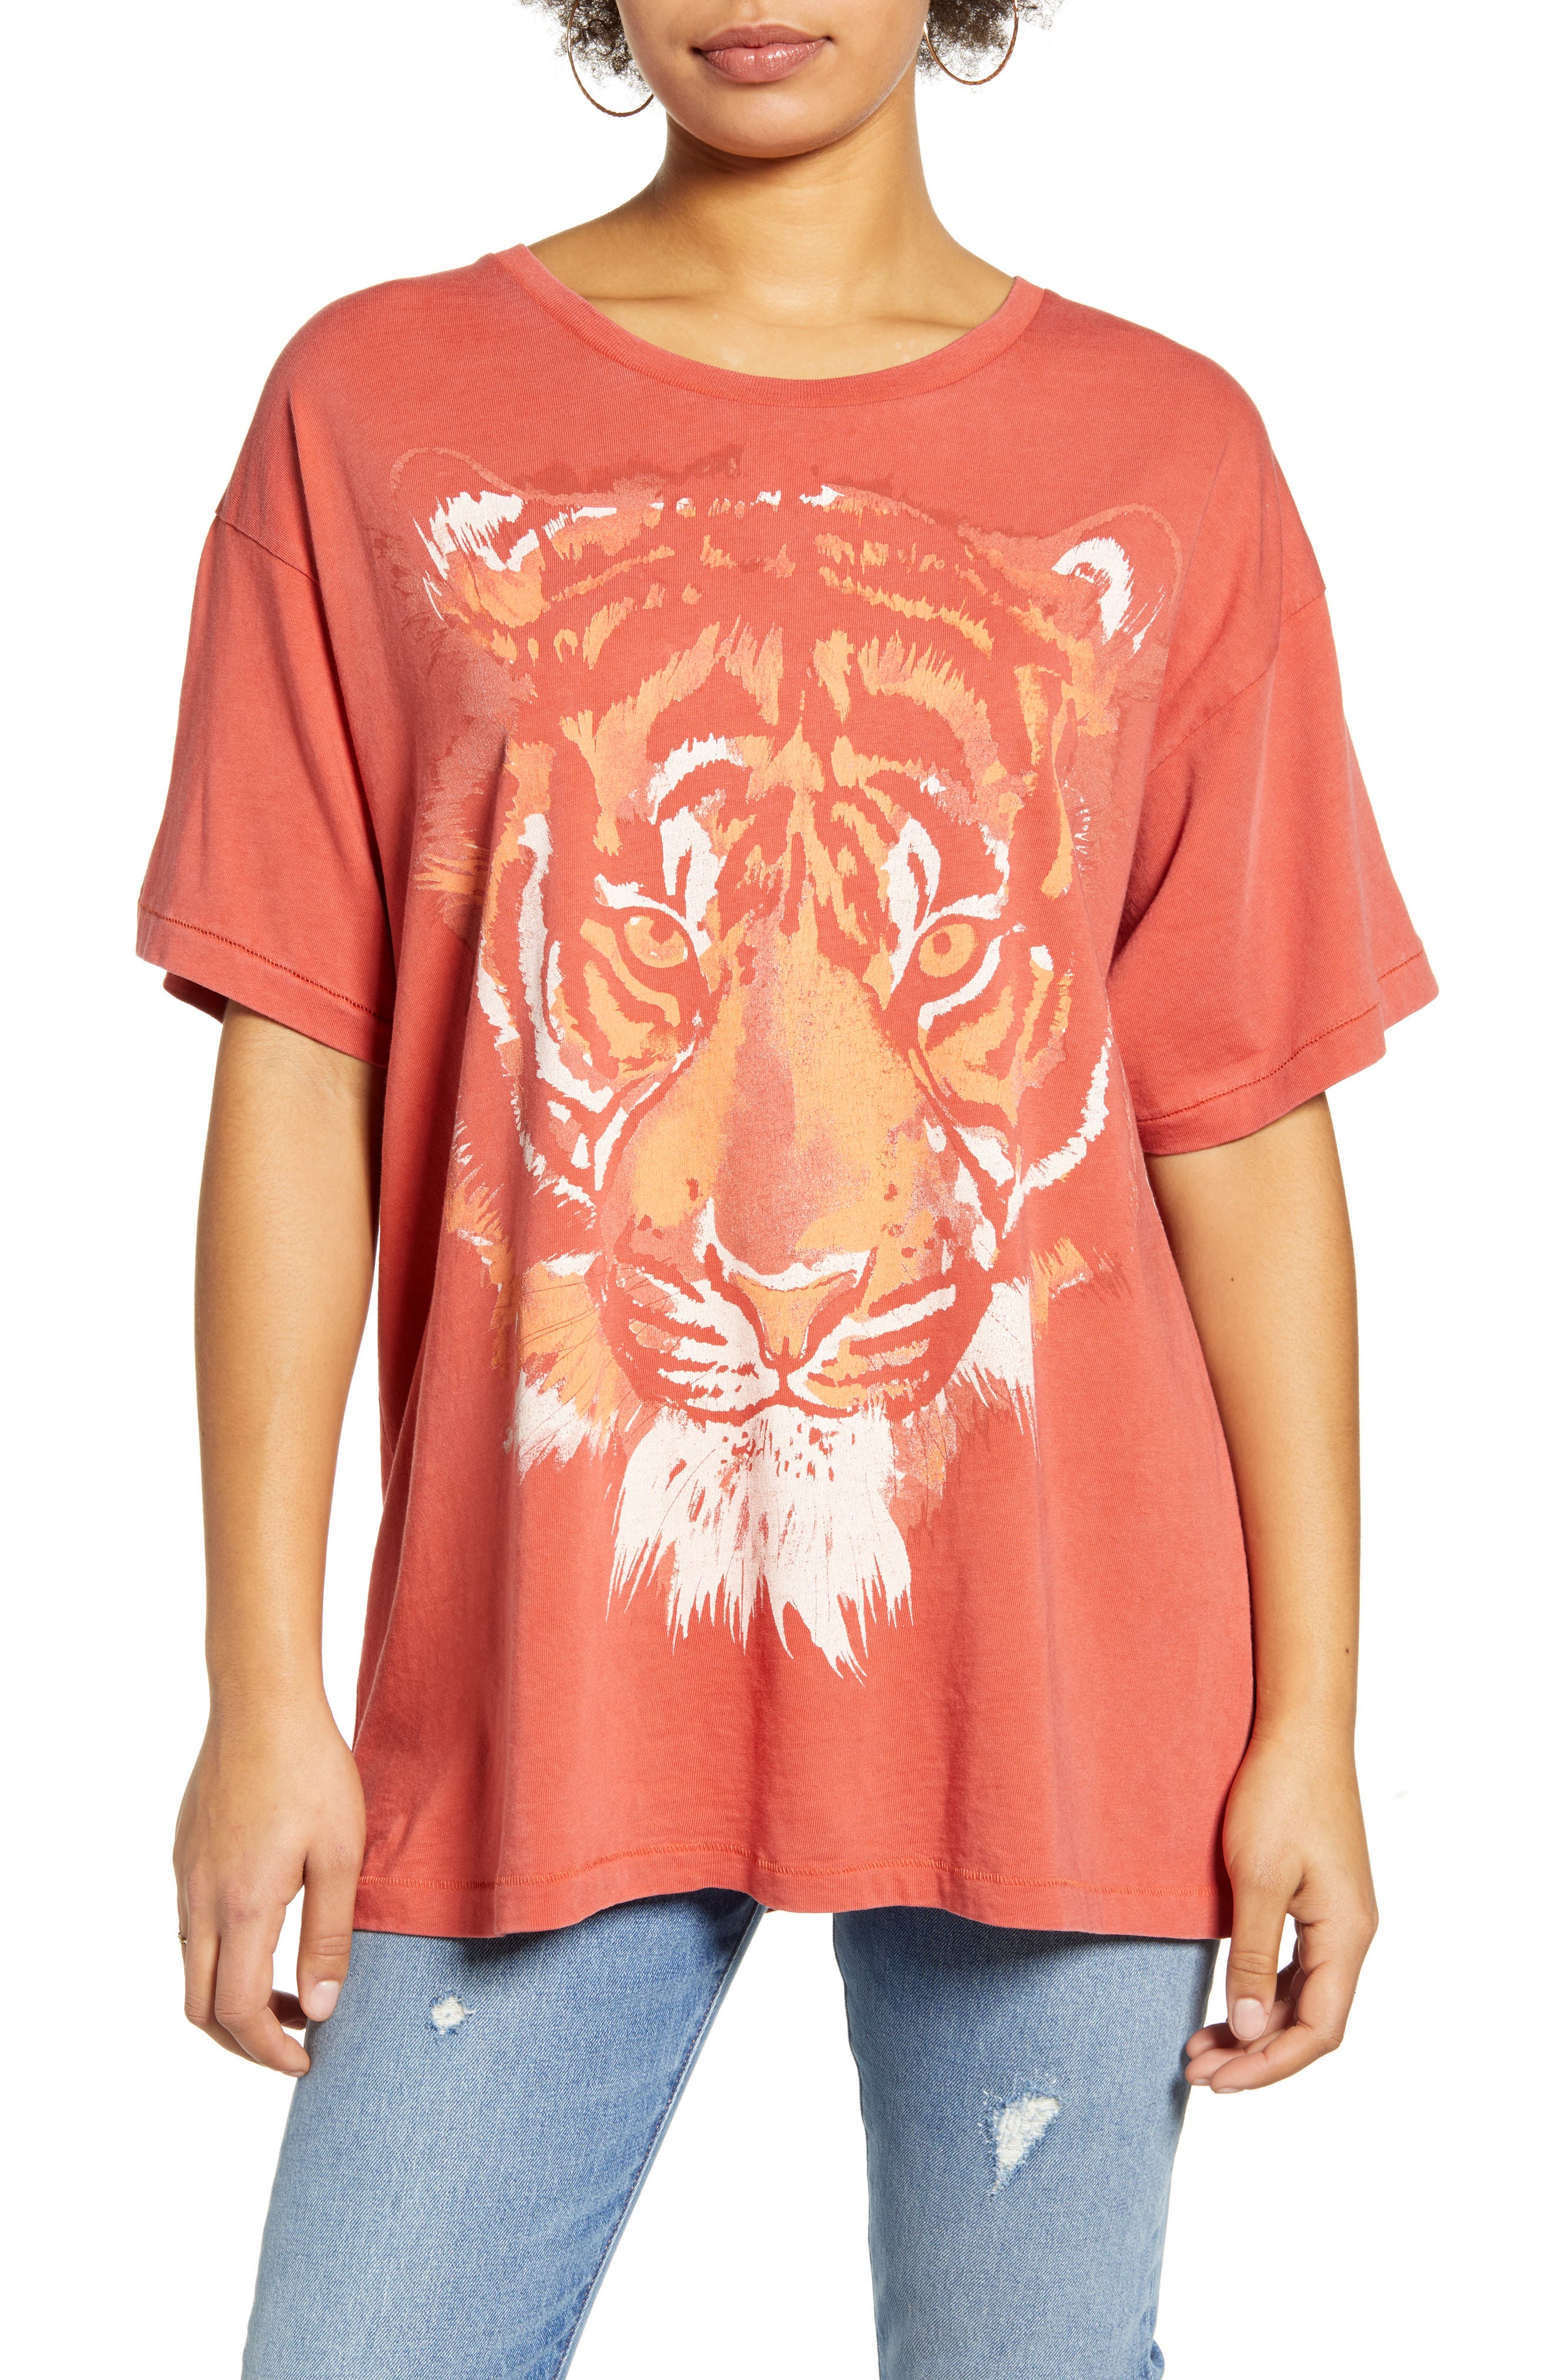 graphic tiger tee